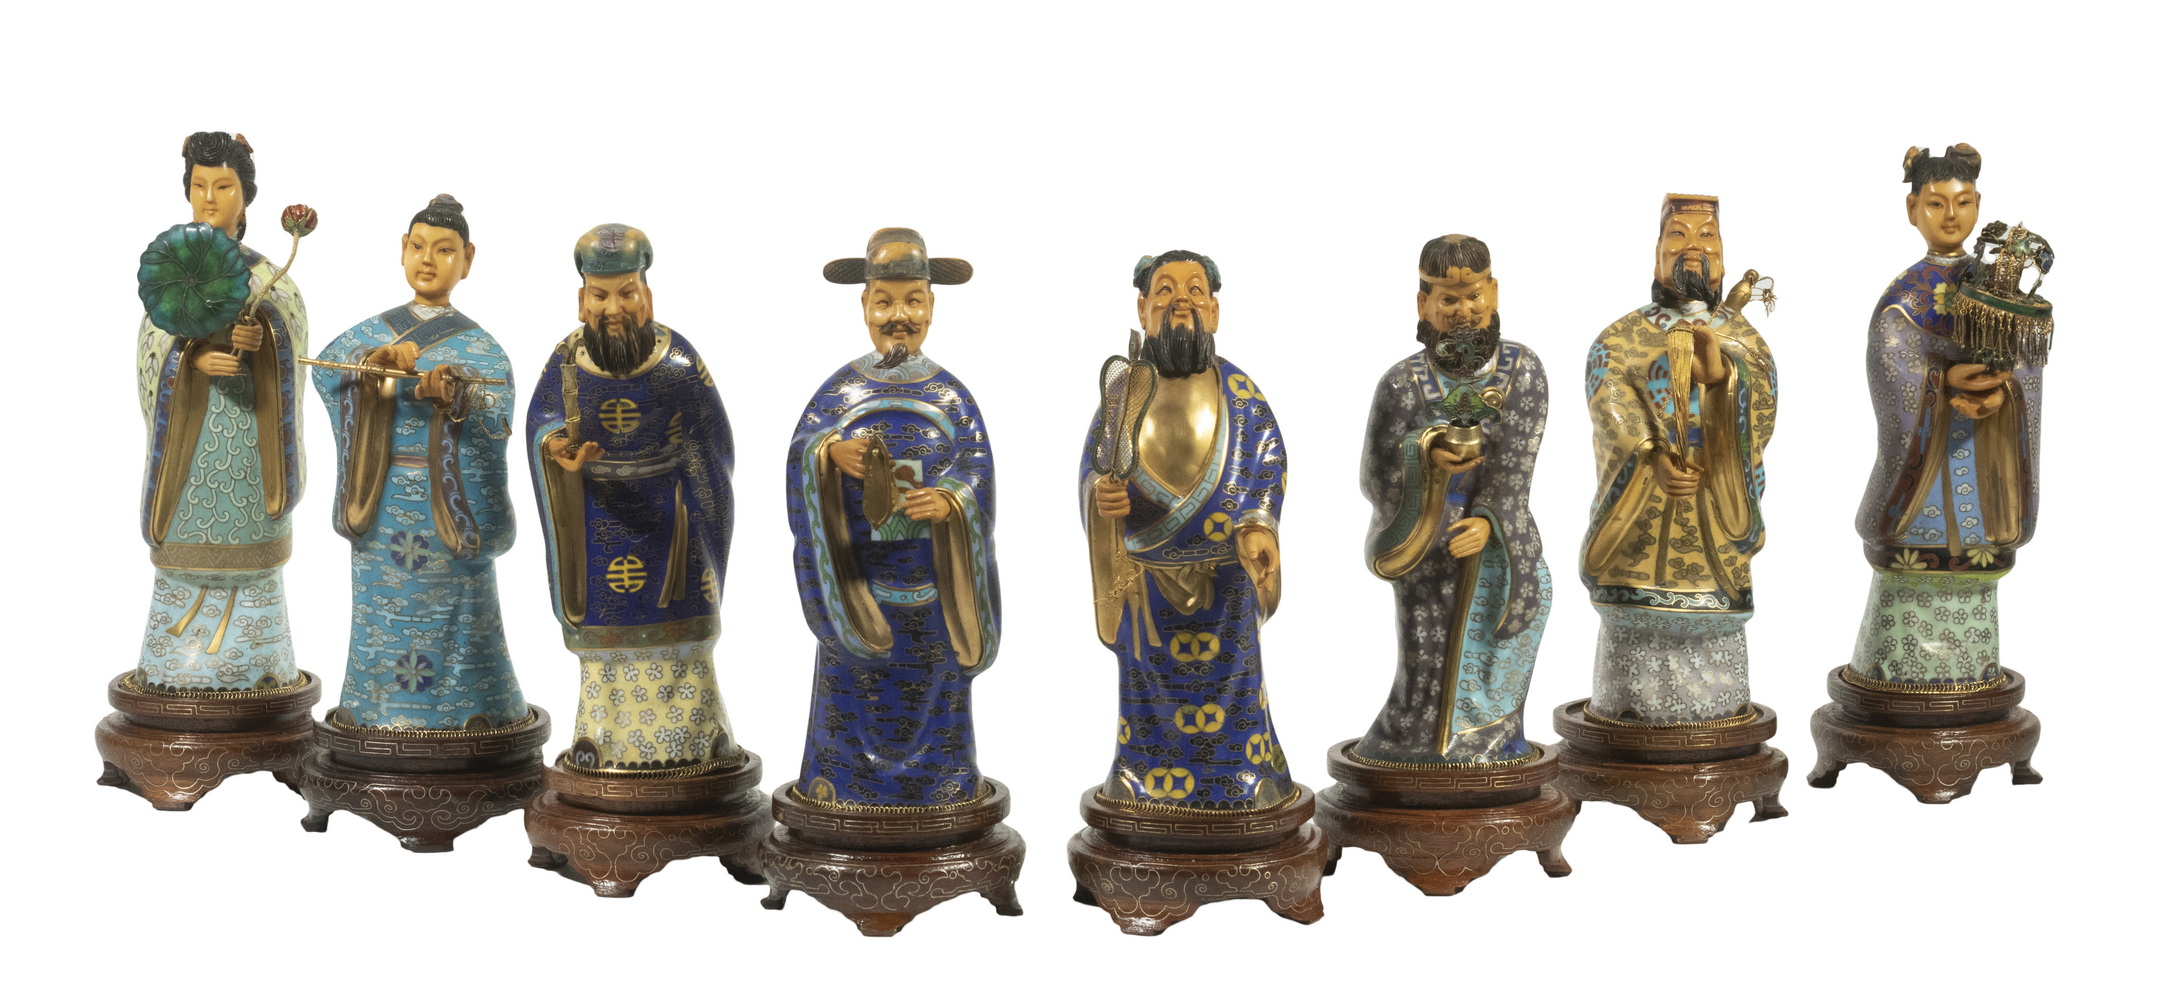  SET OF 8 CHINESE CLOISONNE AND 302b12